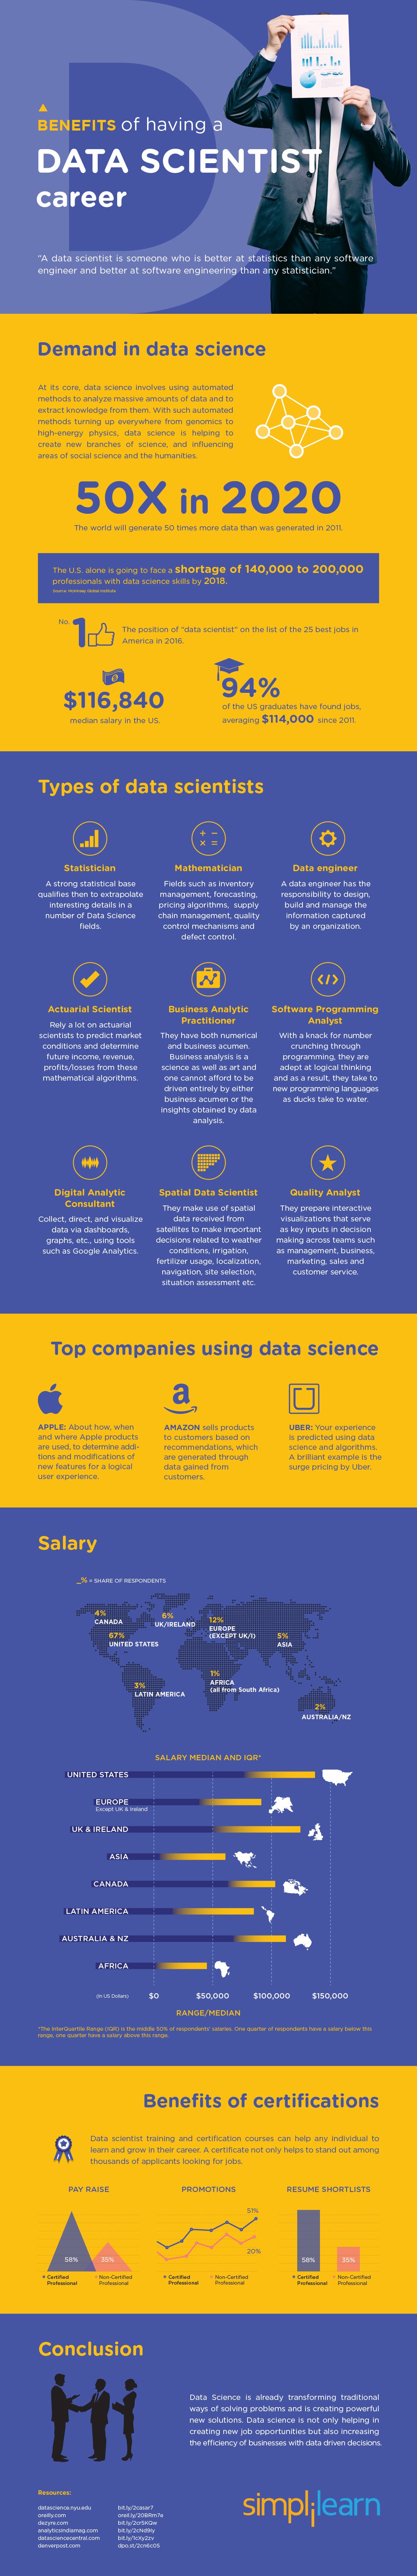 Why Every Large Company is Soon Going to Need Data Science Experts